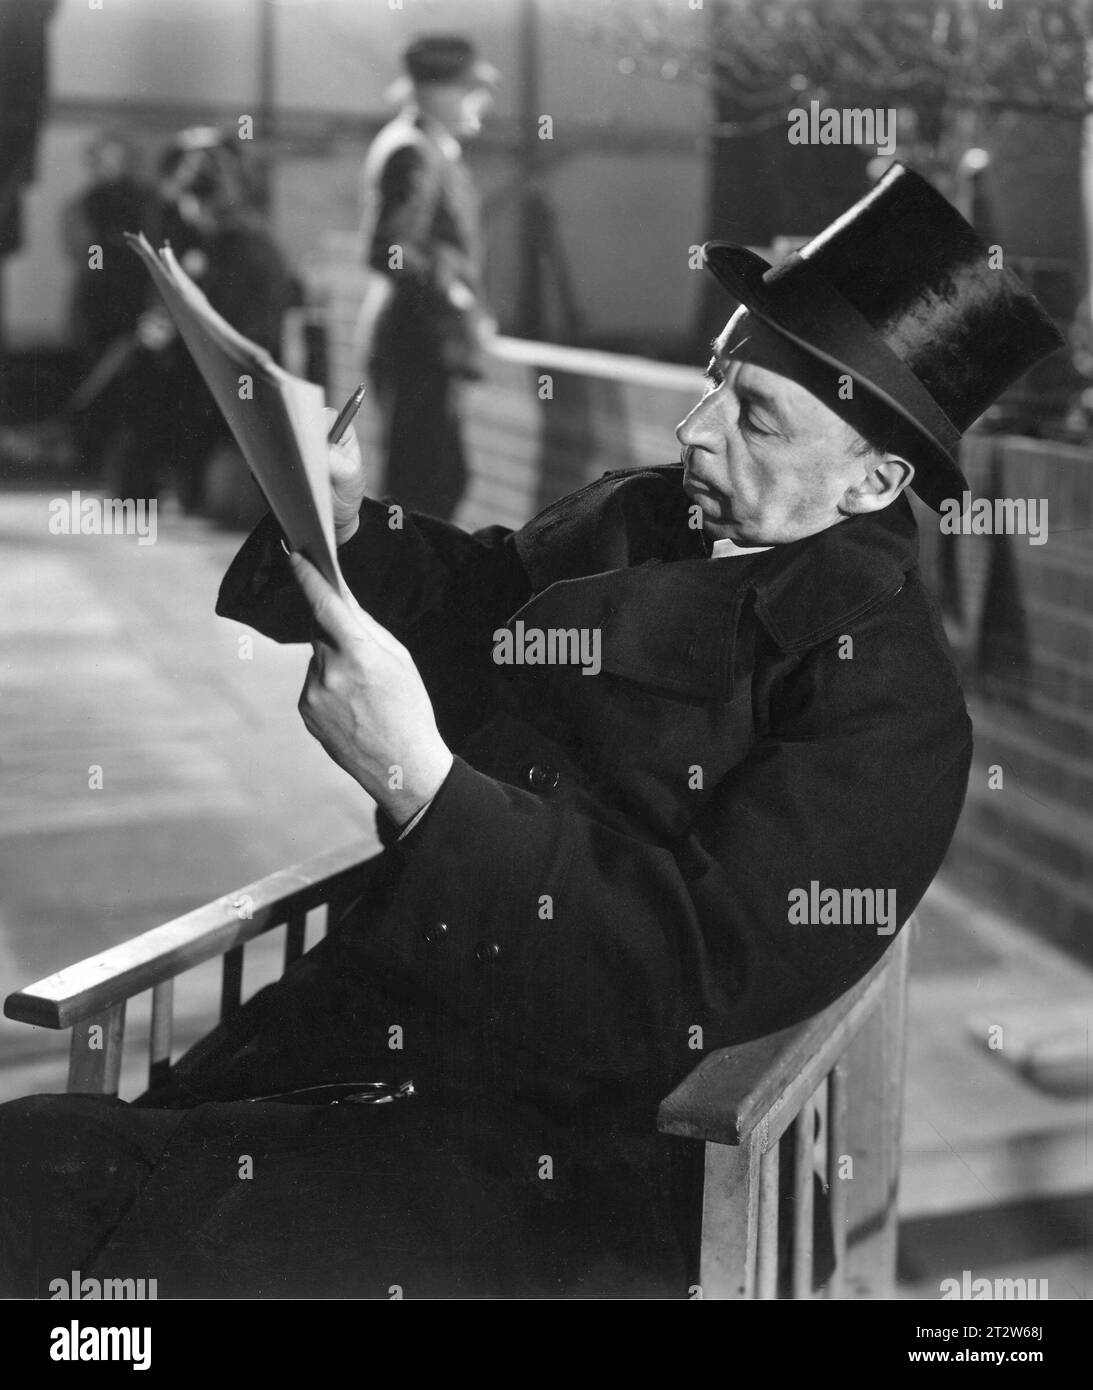 MILES MALLESON as the Hearse Driver relaxing on the set of DEAD OF NIGHT 1945 Directed by BASIL DEARDEN Music GEORGES AURIC Ealing Studios Stock Photo